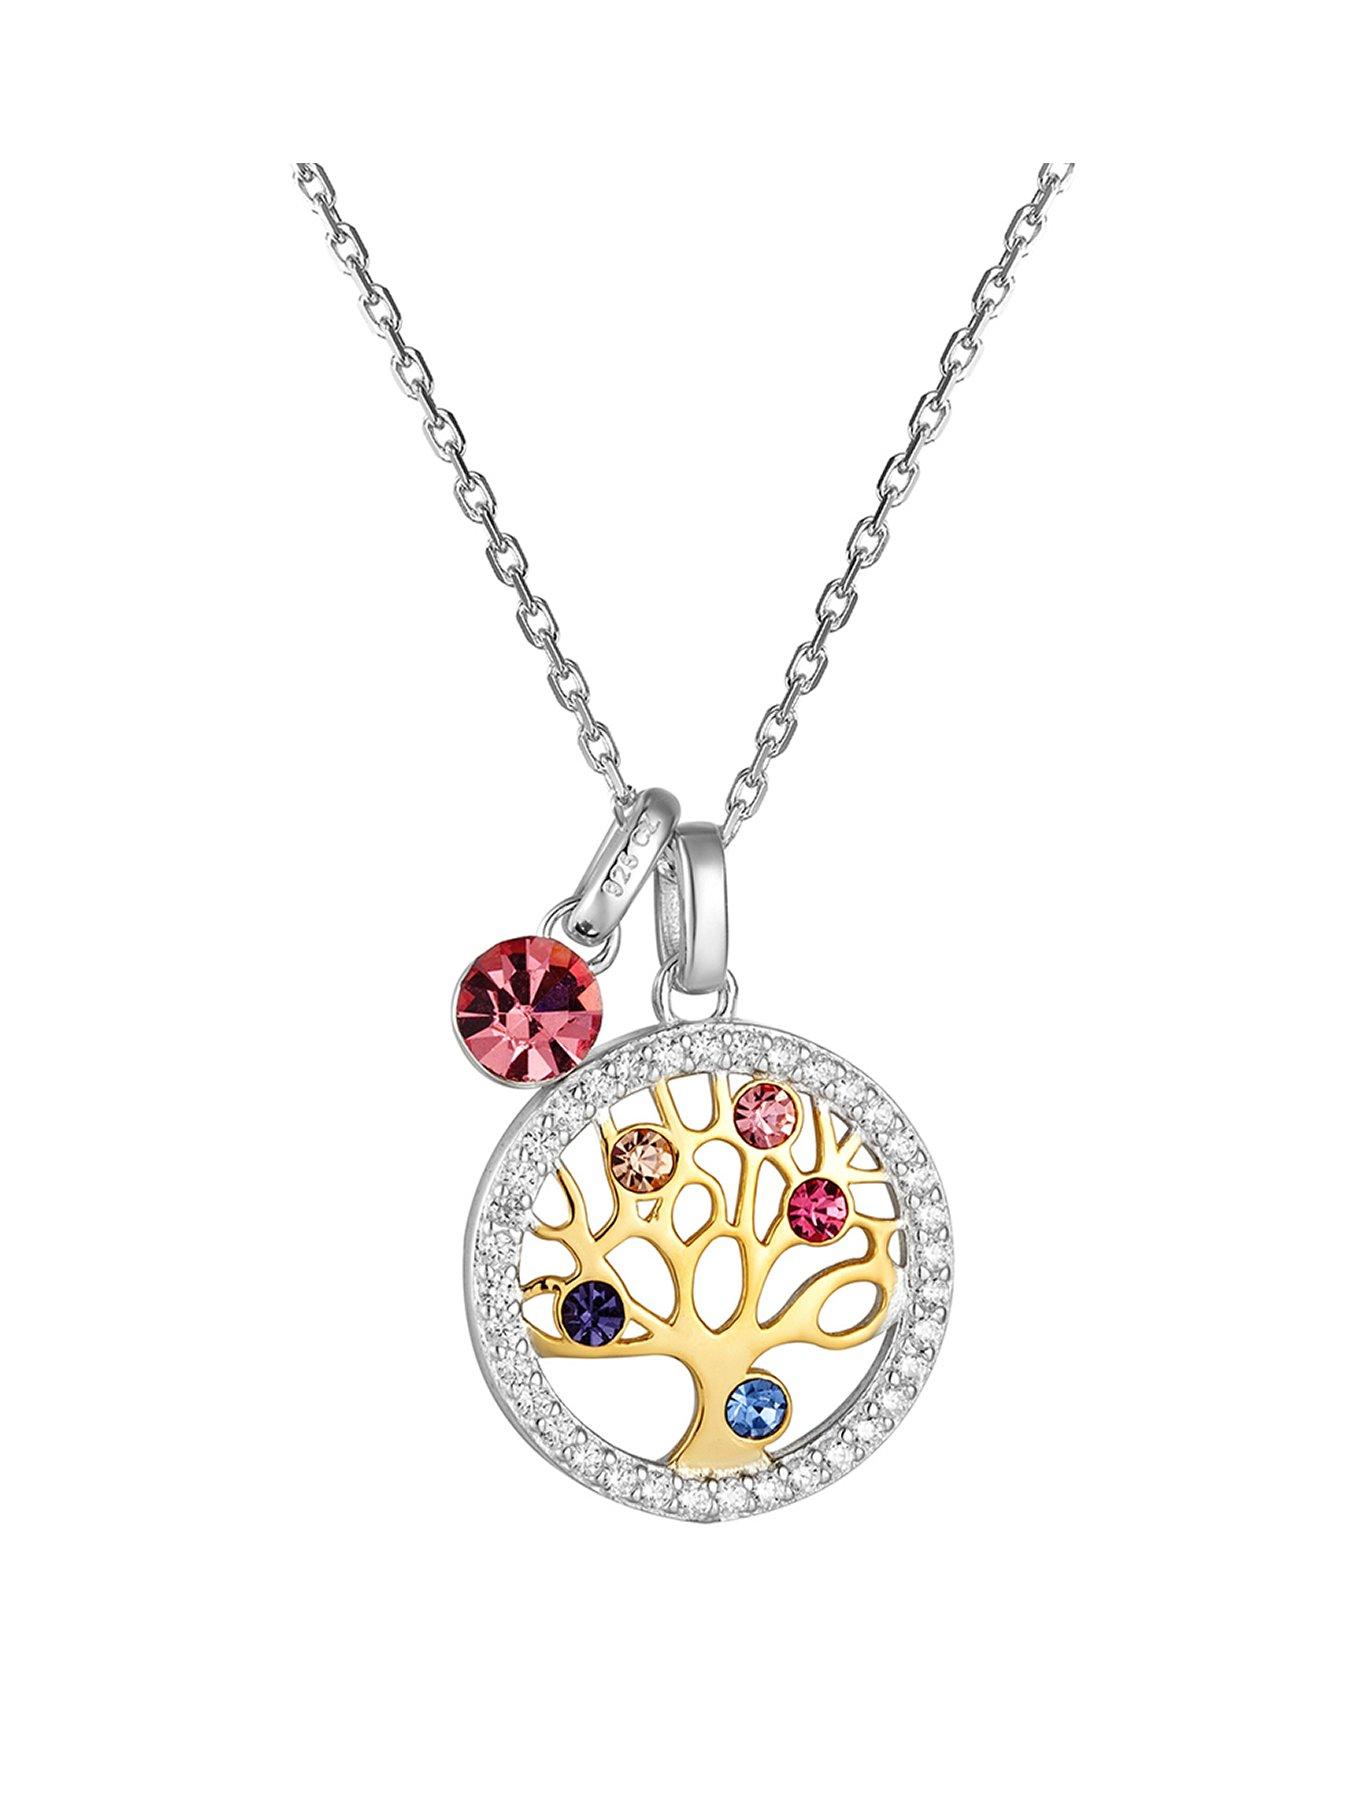  Sterling Silver & Cubic Zirconia Detail Tree Of Life Pendant Necklace